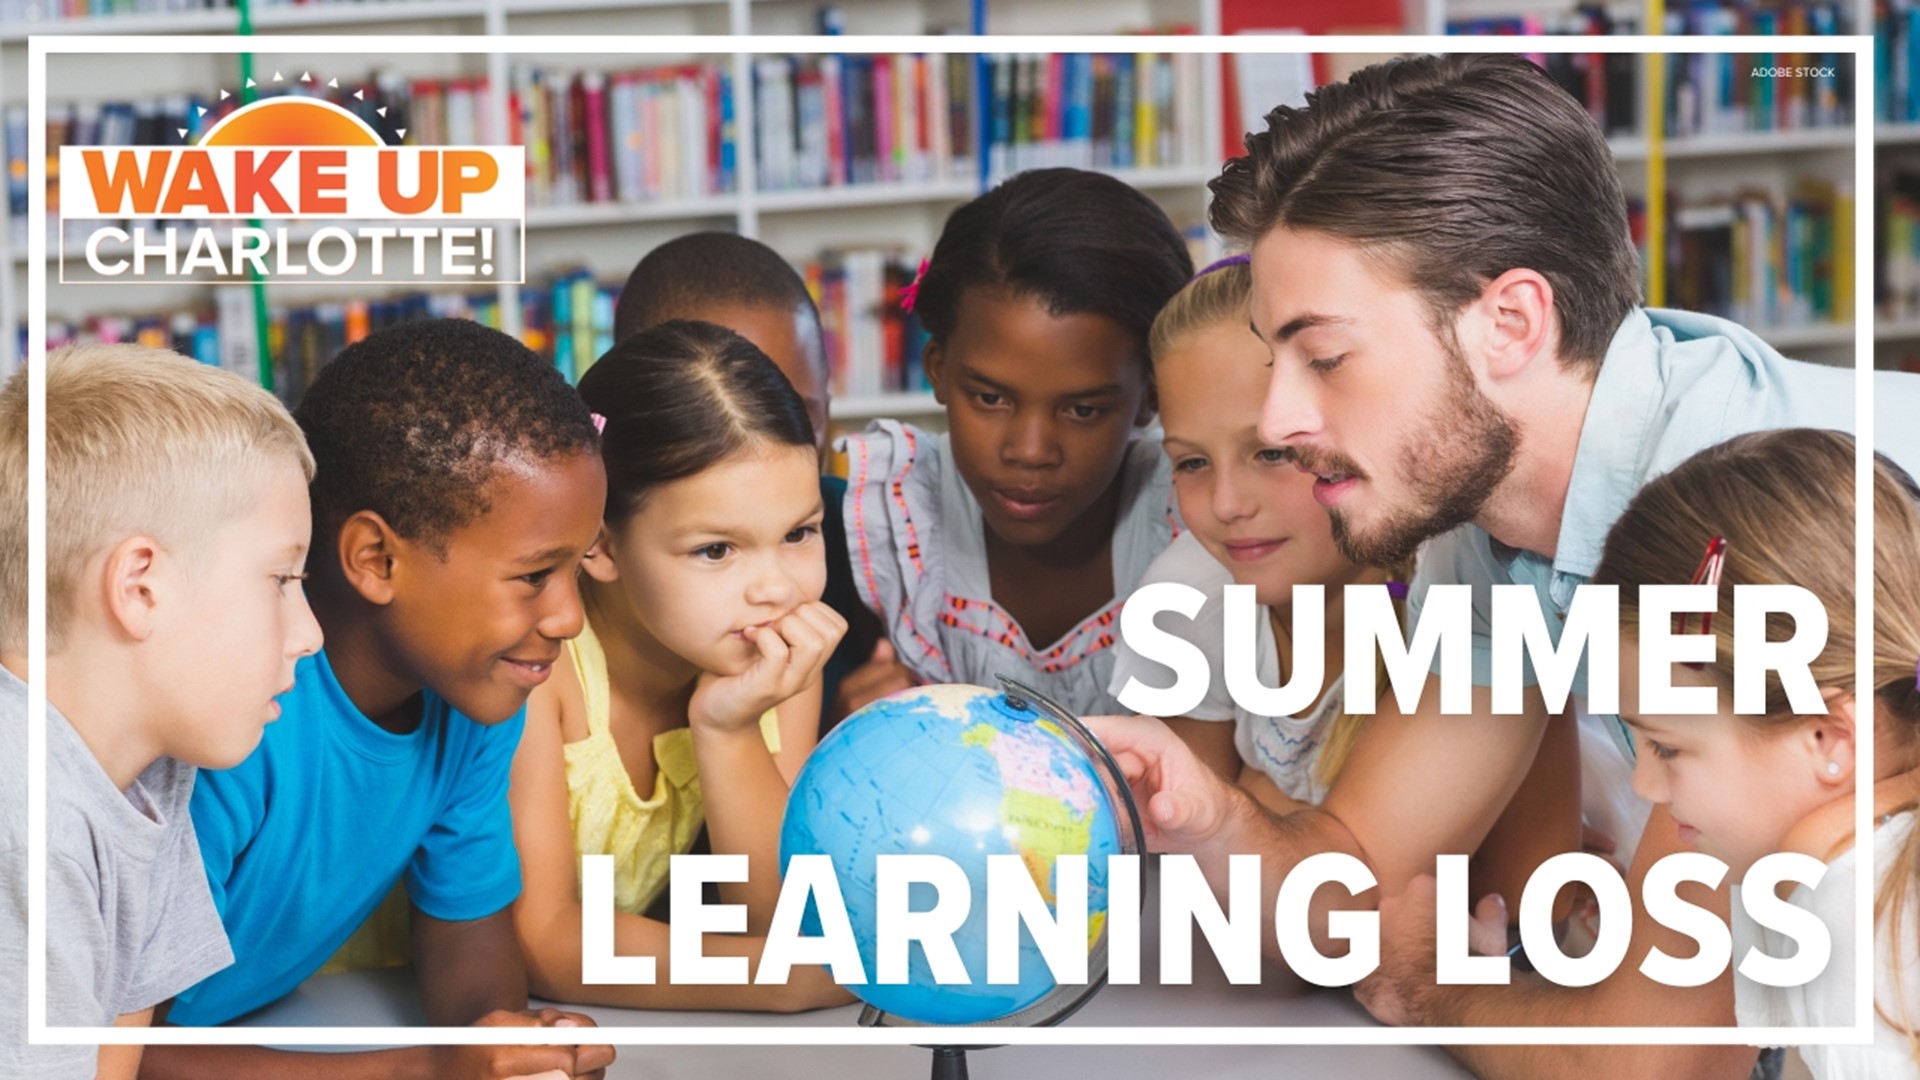 Without constant learning, students often lose a bit of their knowledge over the summer months, and it's not just limited to academics.